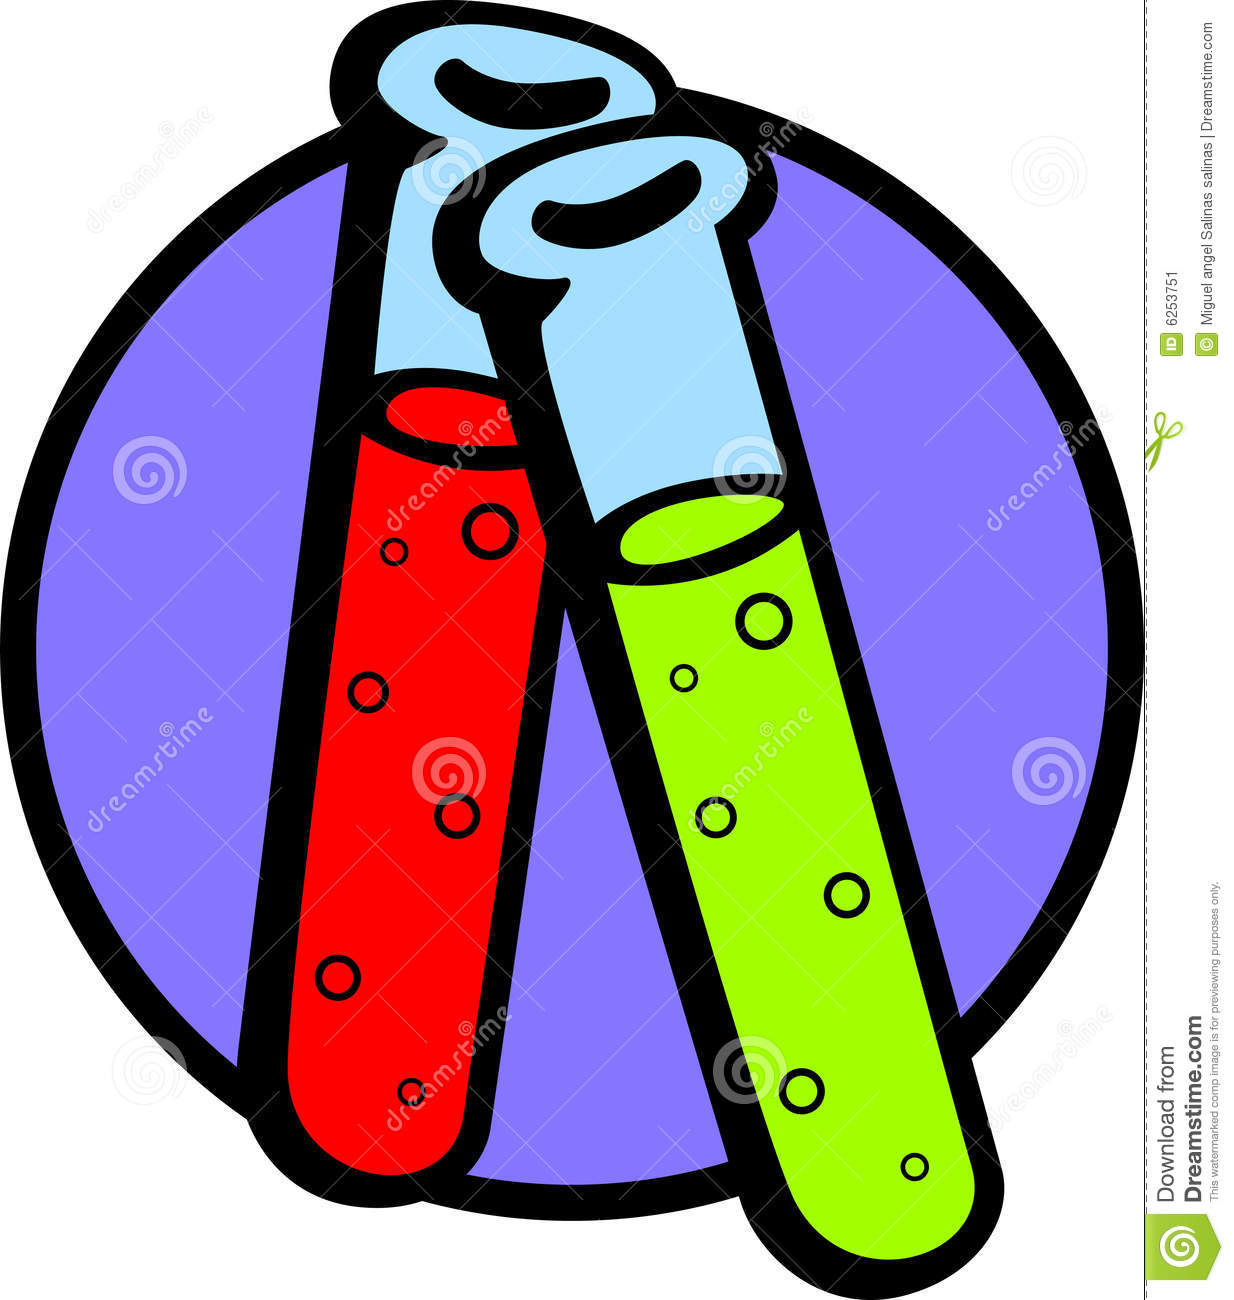 chemicals clipart chemistry